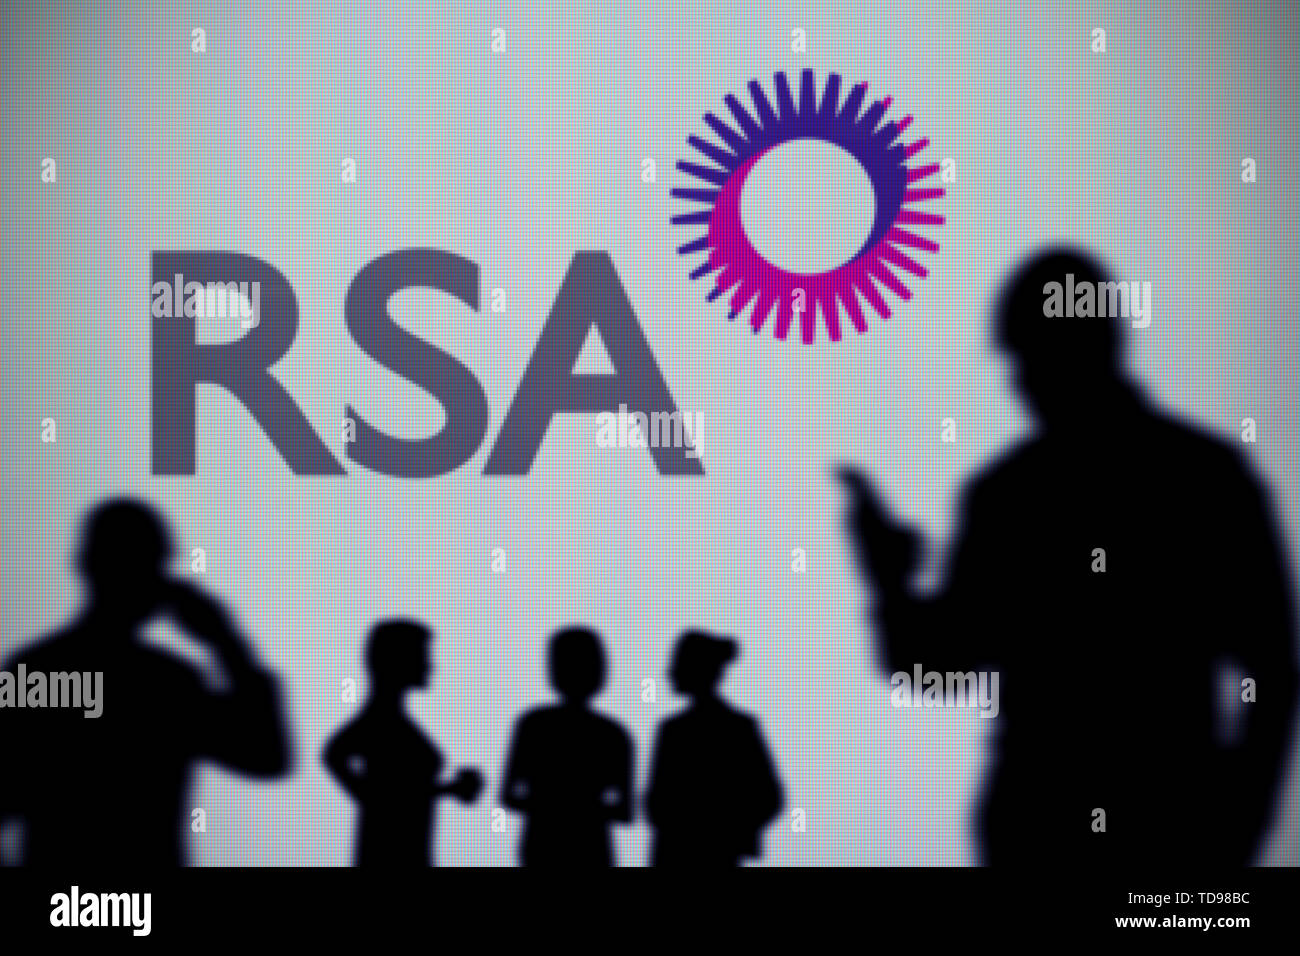 The Royal Sun Alliance (RSA) logo is seen on an LED screen in the background while a silhouetted person uses a smartphone (Editorial use only) Stock Photo